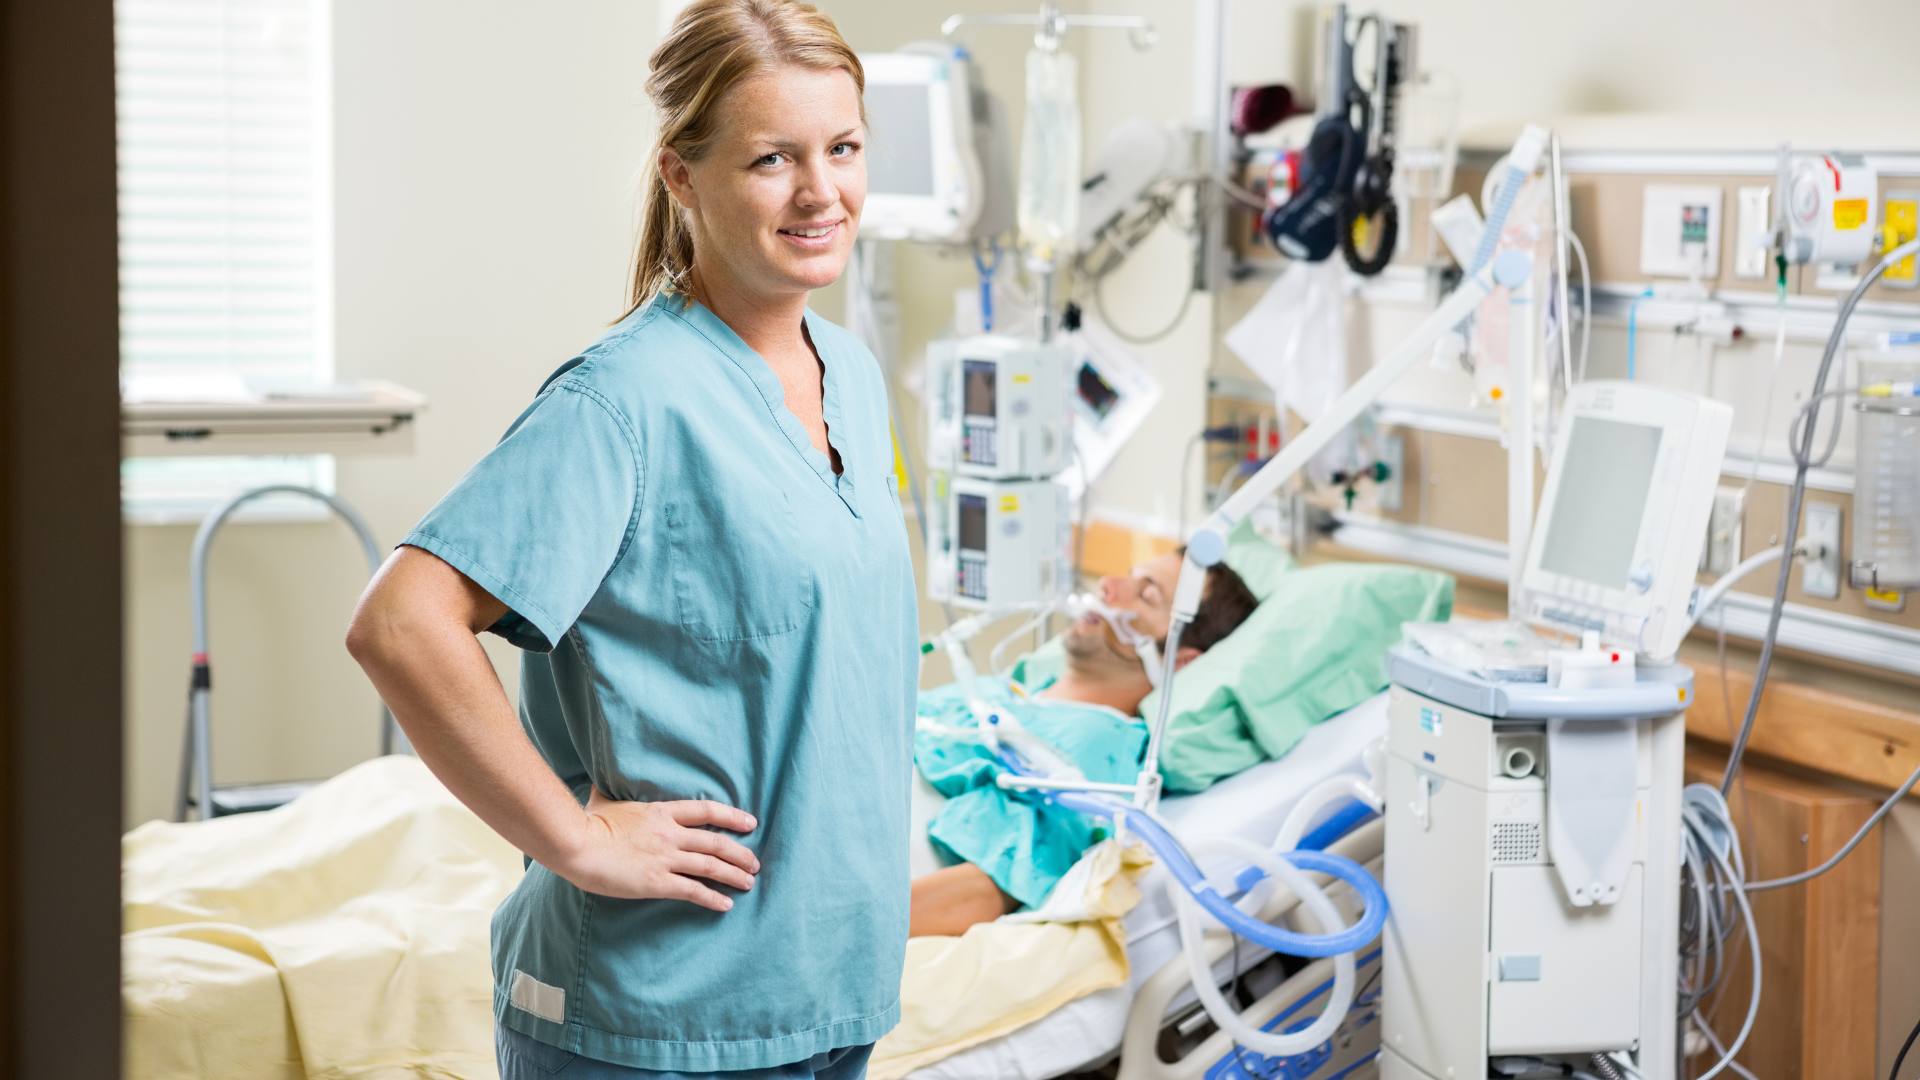 A nurse in an ICU room stands in front of a patient, demonstrating the job of a critical care nurse.